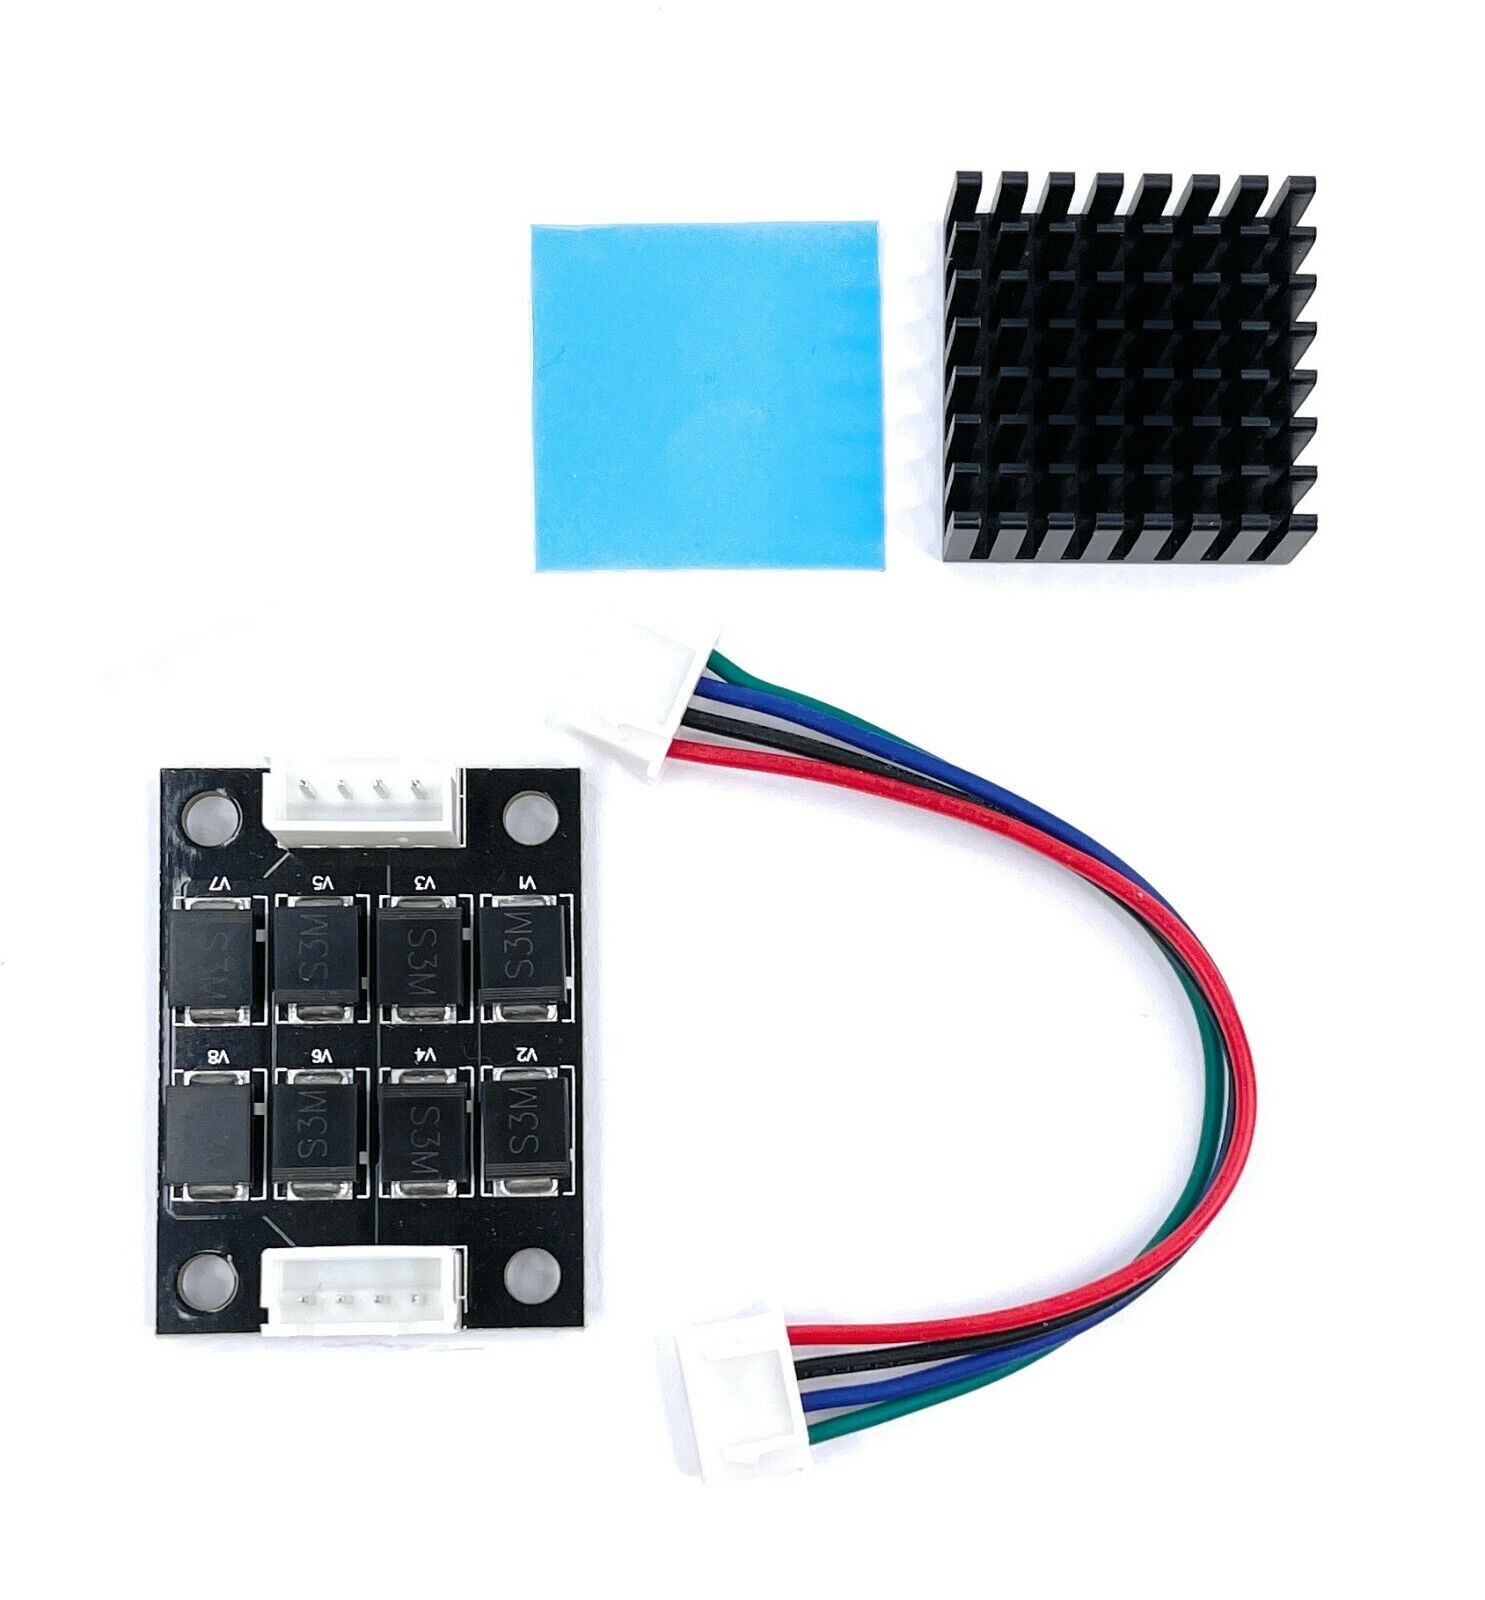 3D Printer TL Smoother for Stepper Motor with Heatsink Kit Comp with DRV8825 